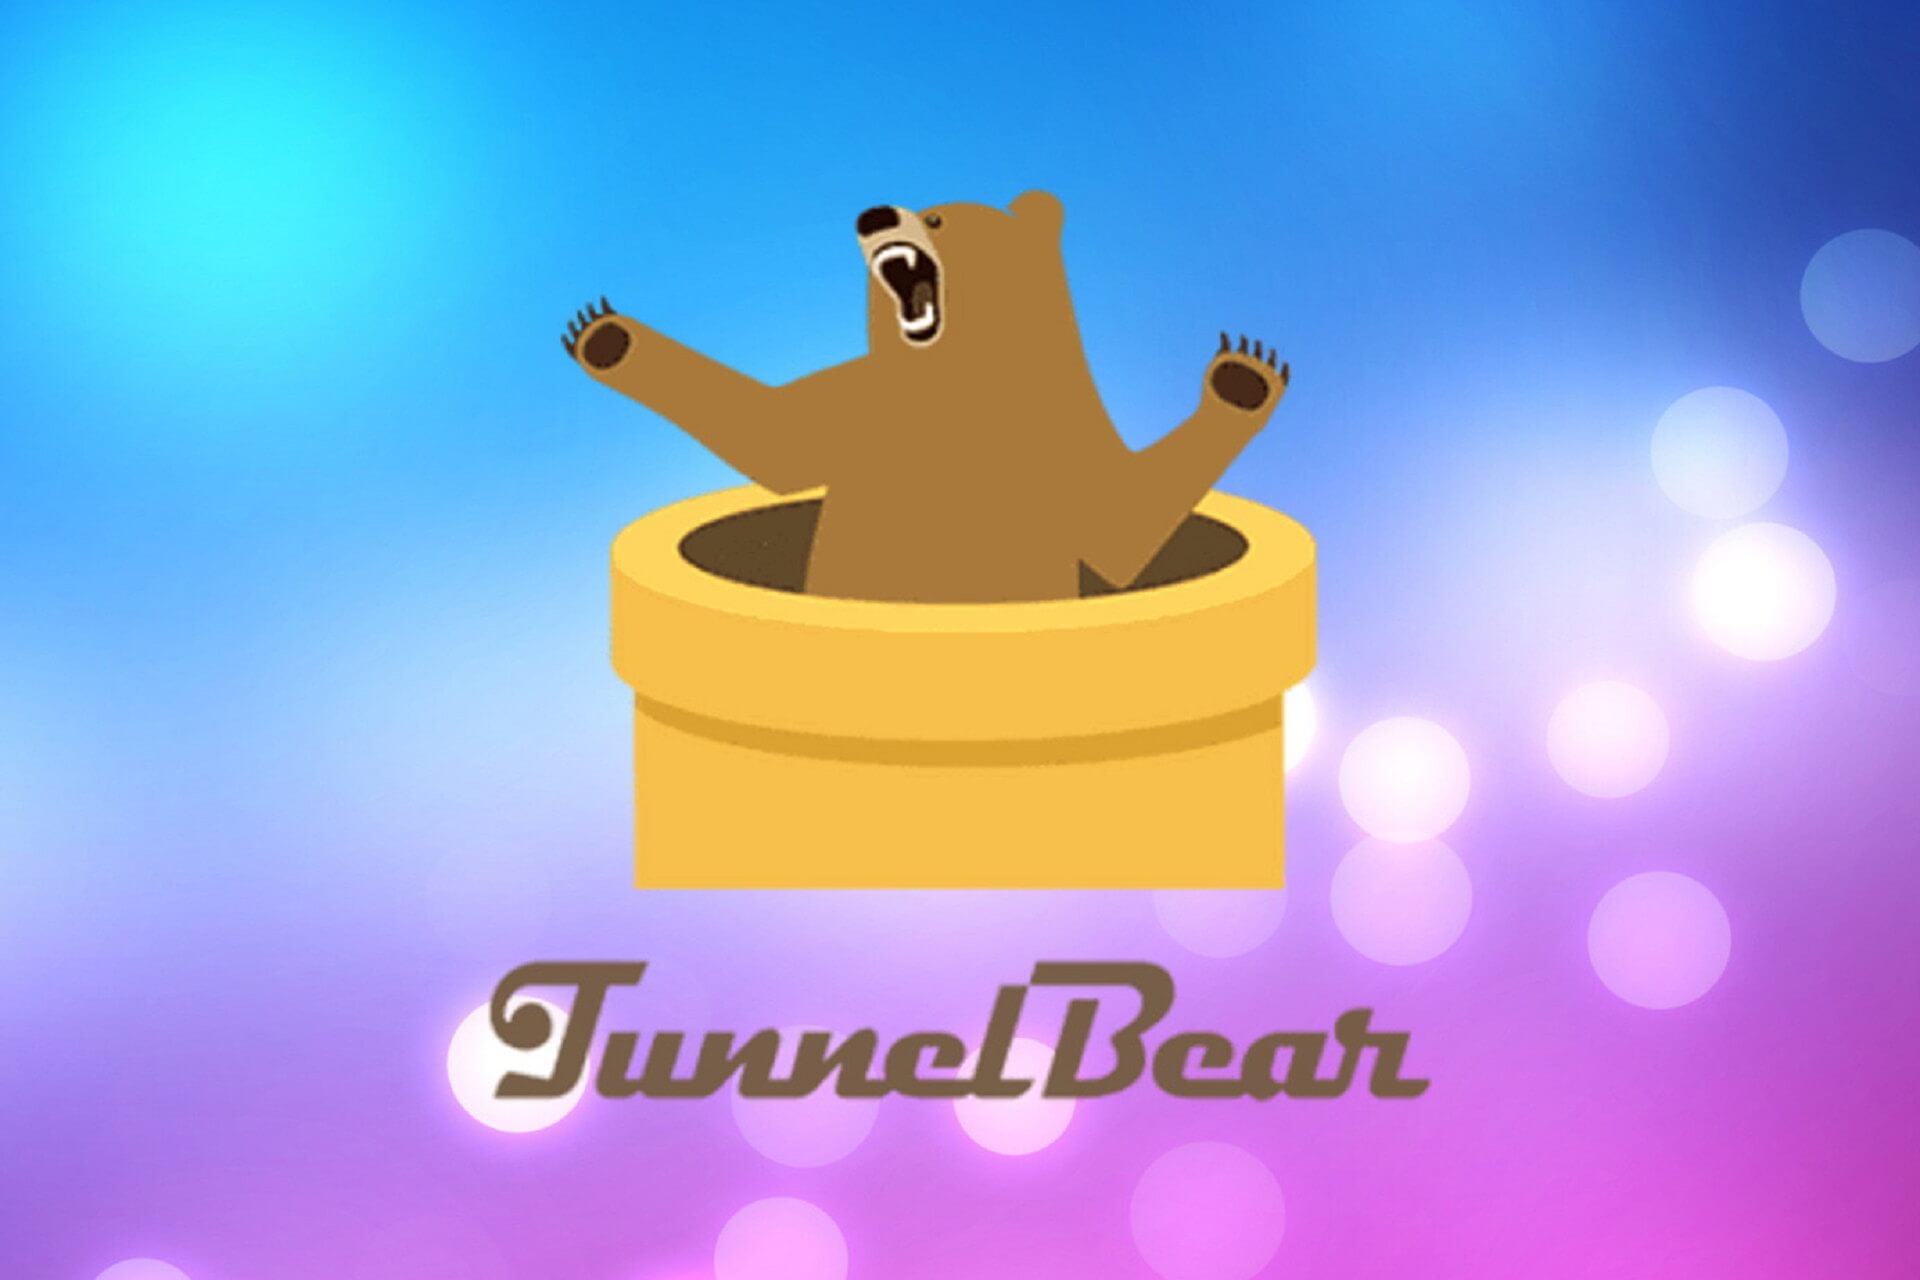 Tunnelbear VPN are using crying version of their mascot on the uninstaller  : r/manipulativepuppy